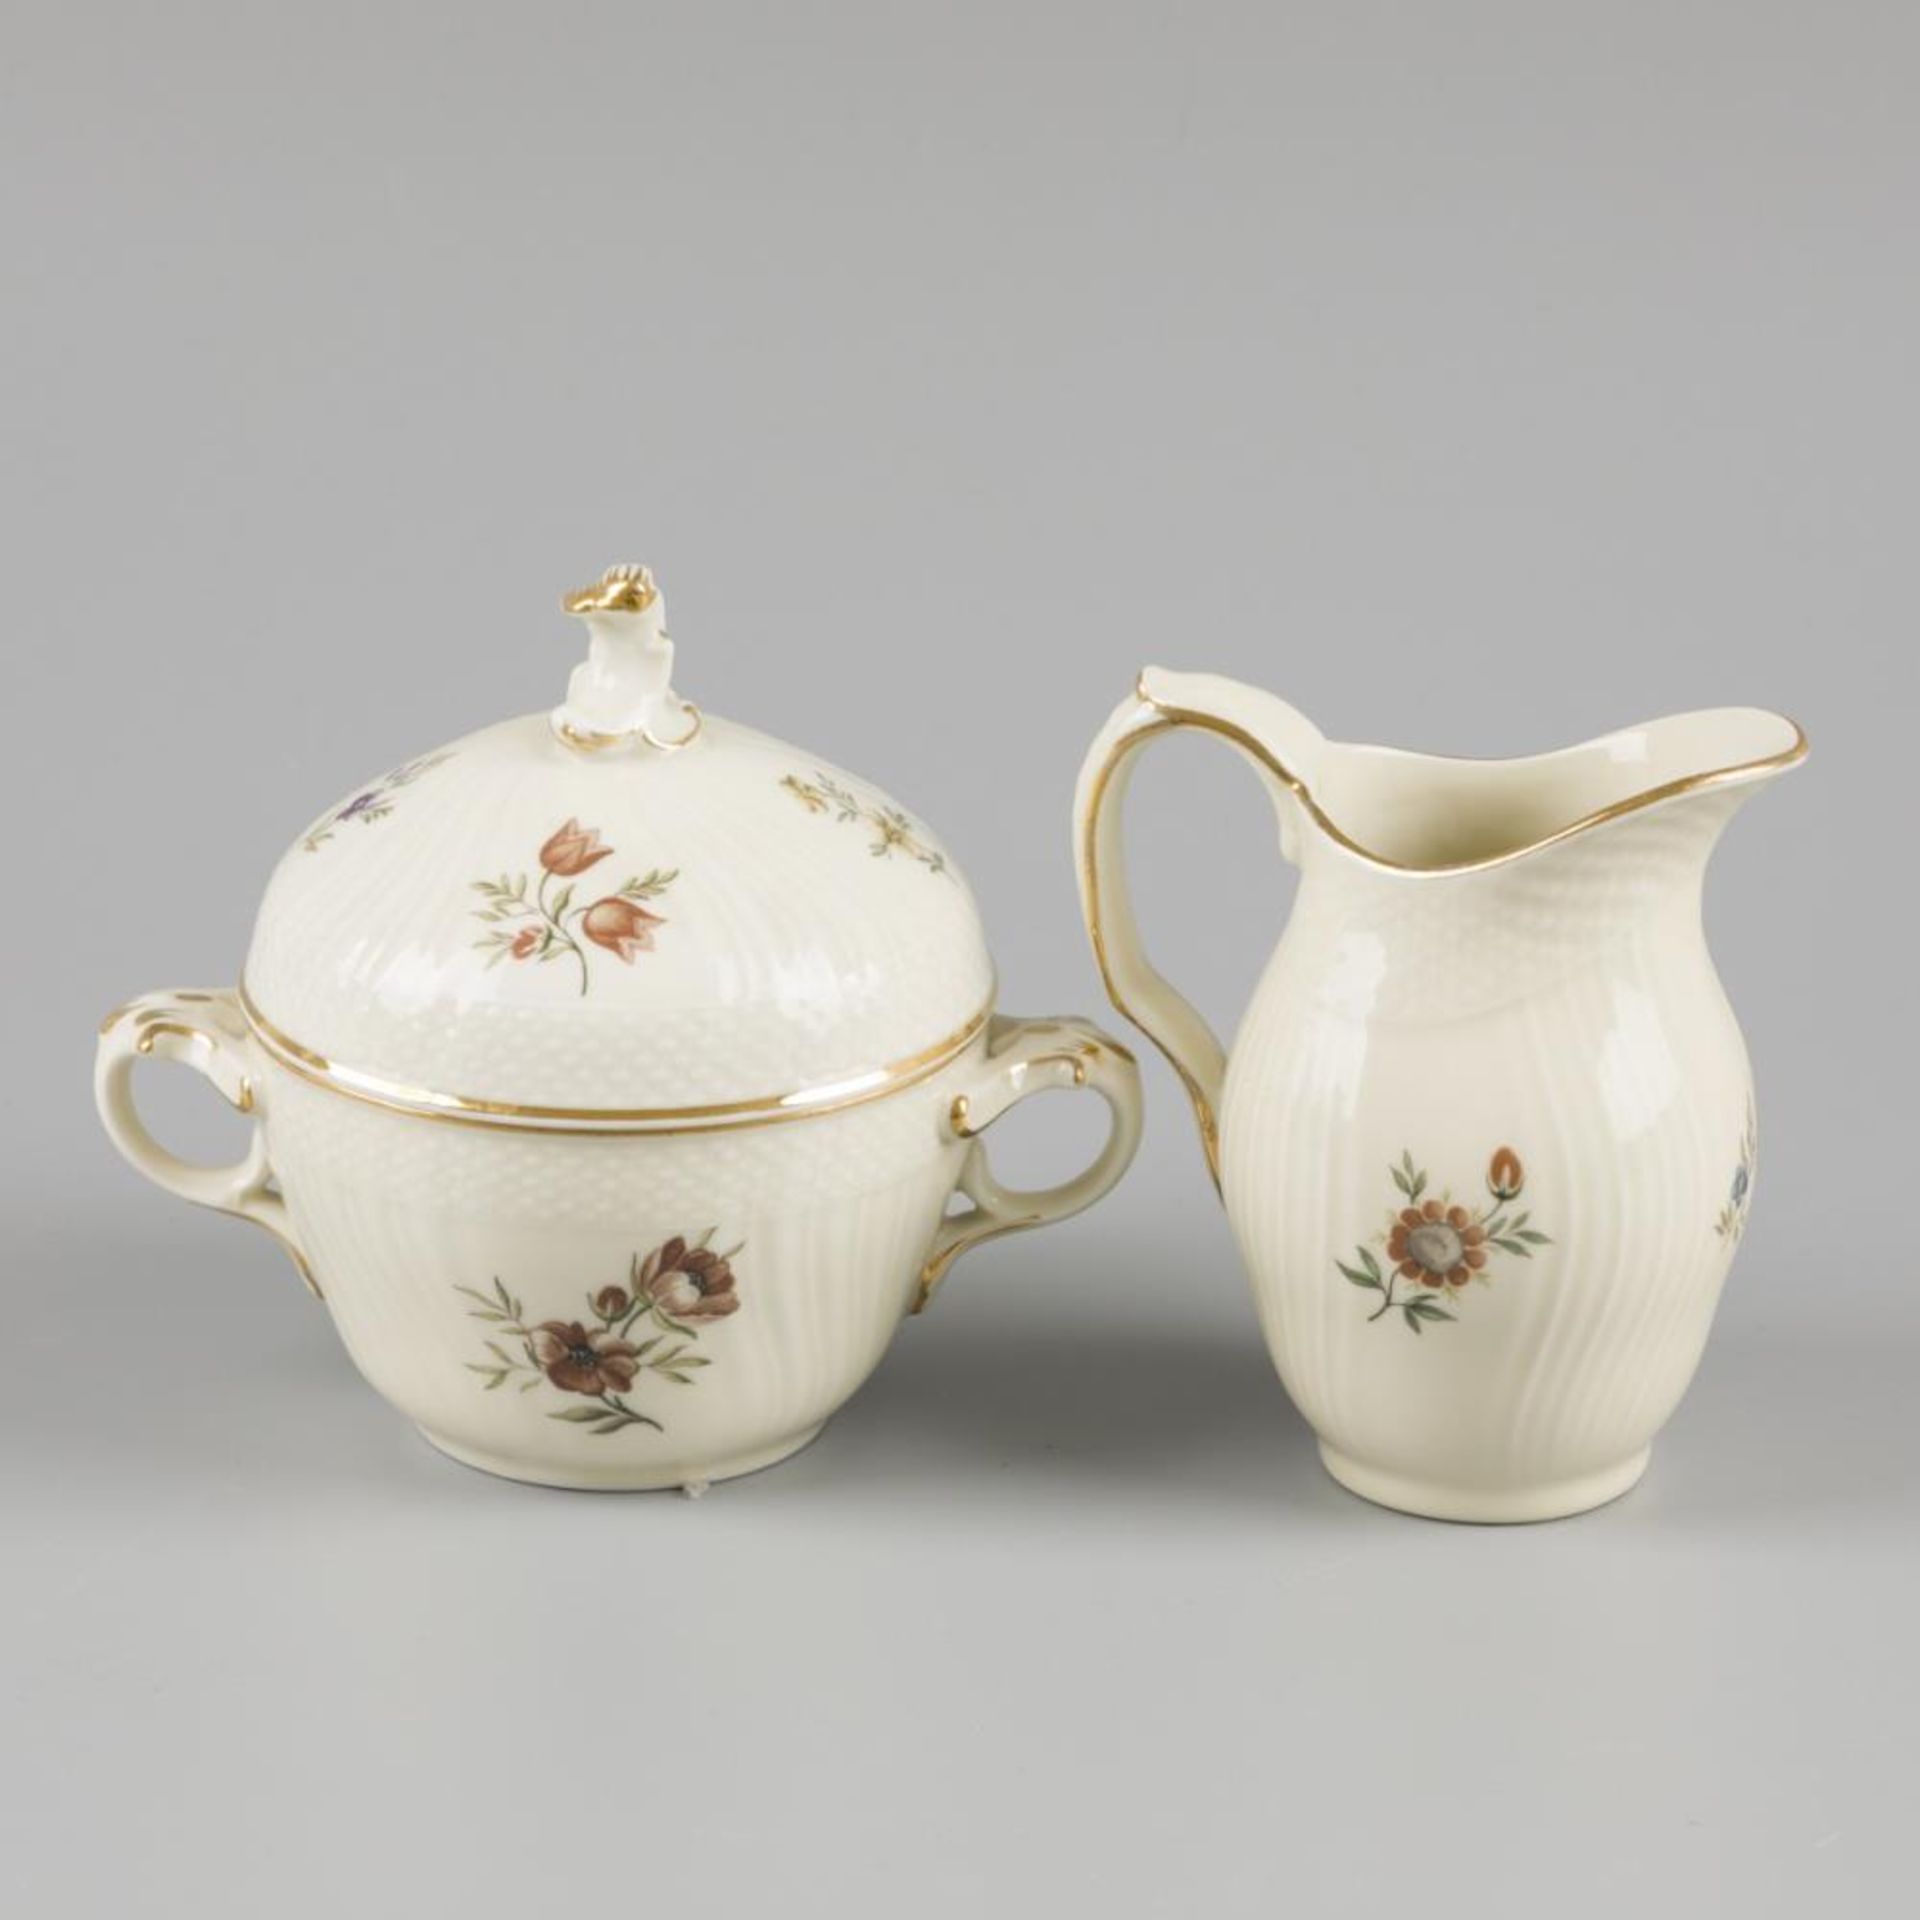 A porcelain cream set decorated with flowers, marked Royal Copenhagen. Denmark, 20th century. - Image 2 of 3